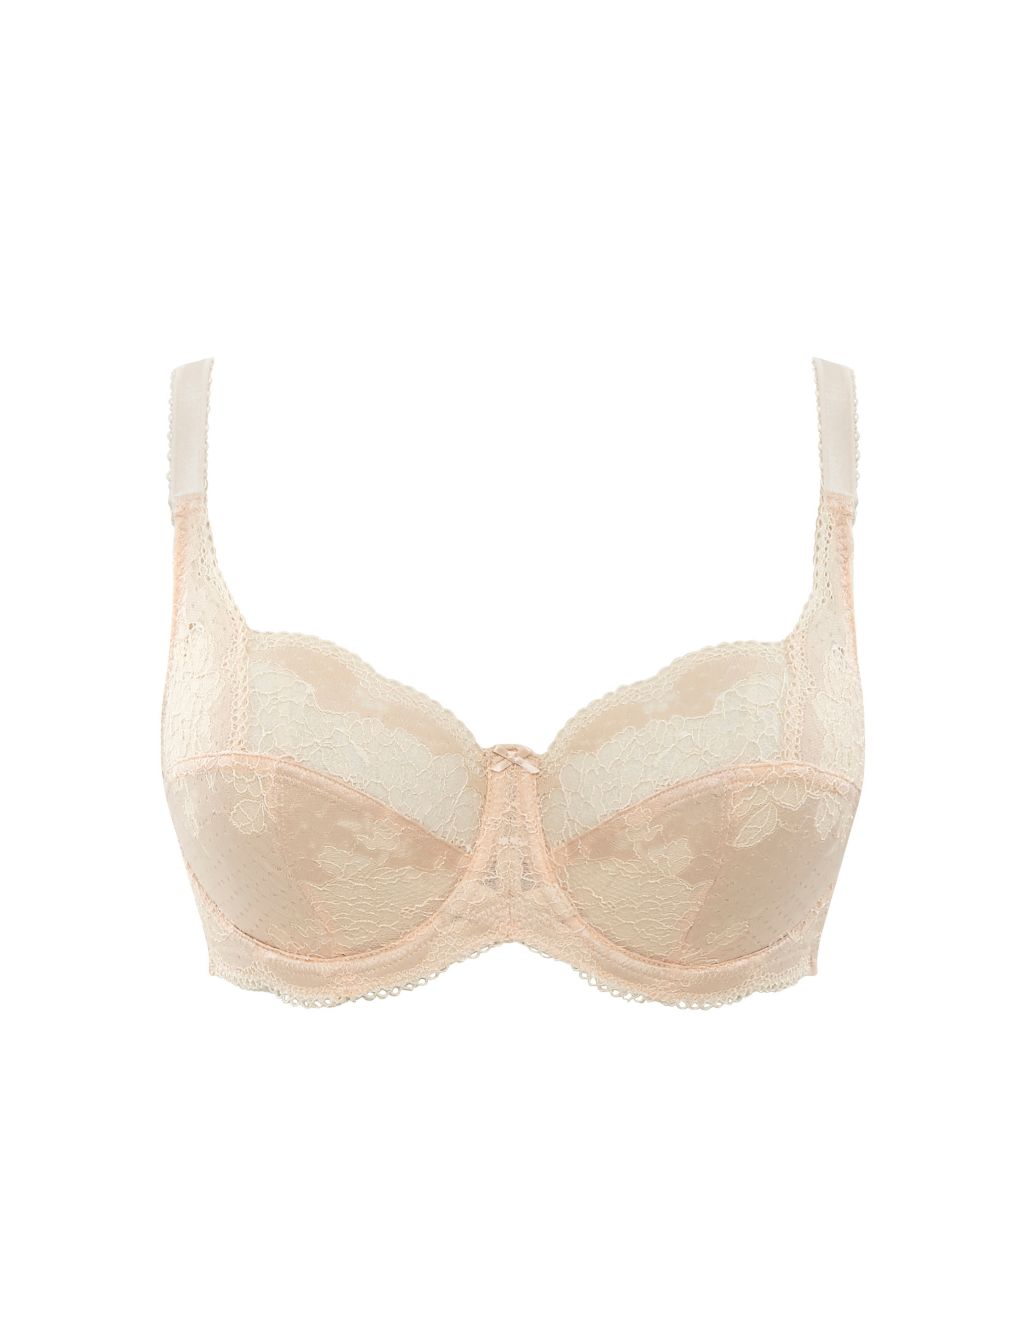 Clara Lace Wired Full Cup Bra D-J image 2